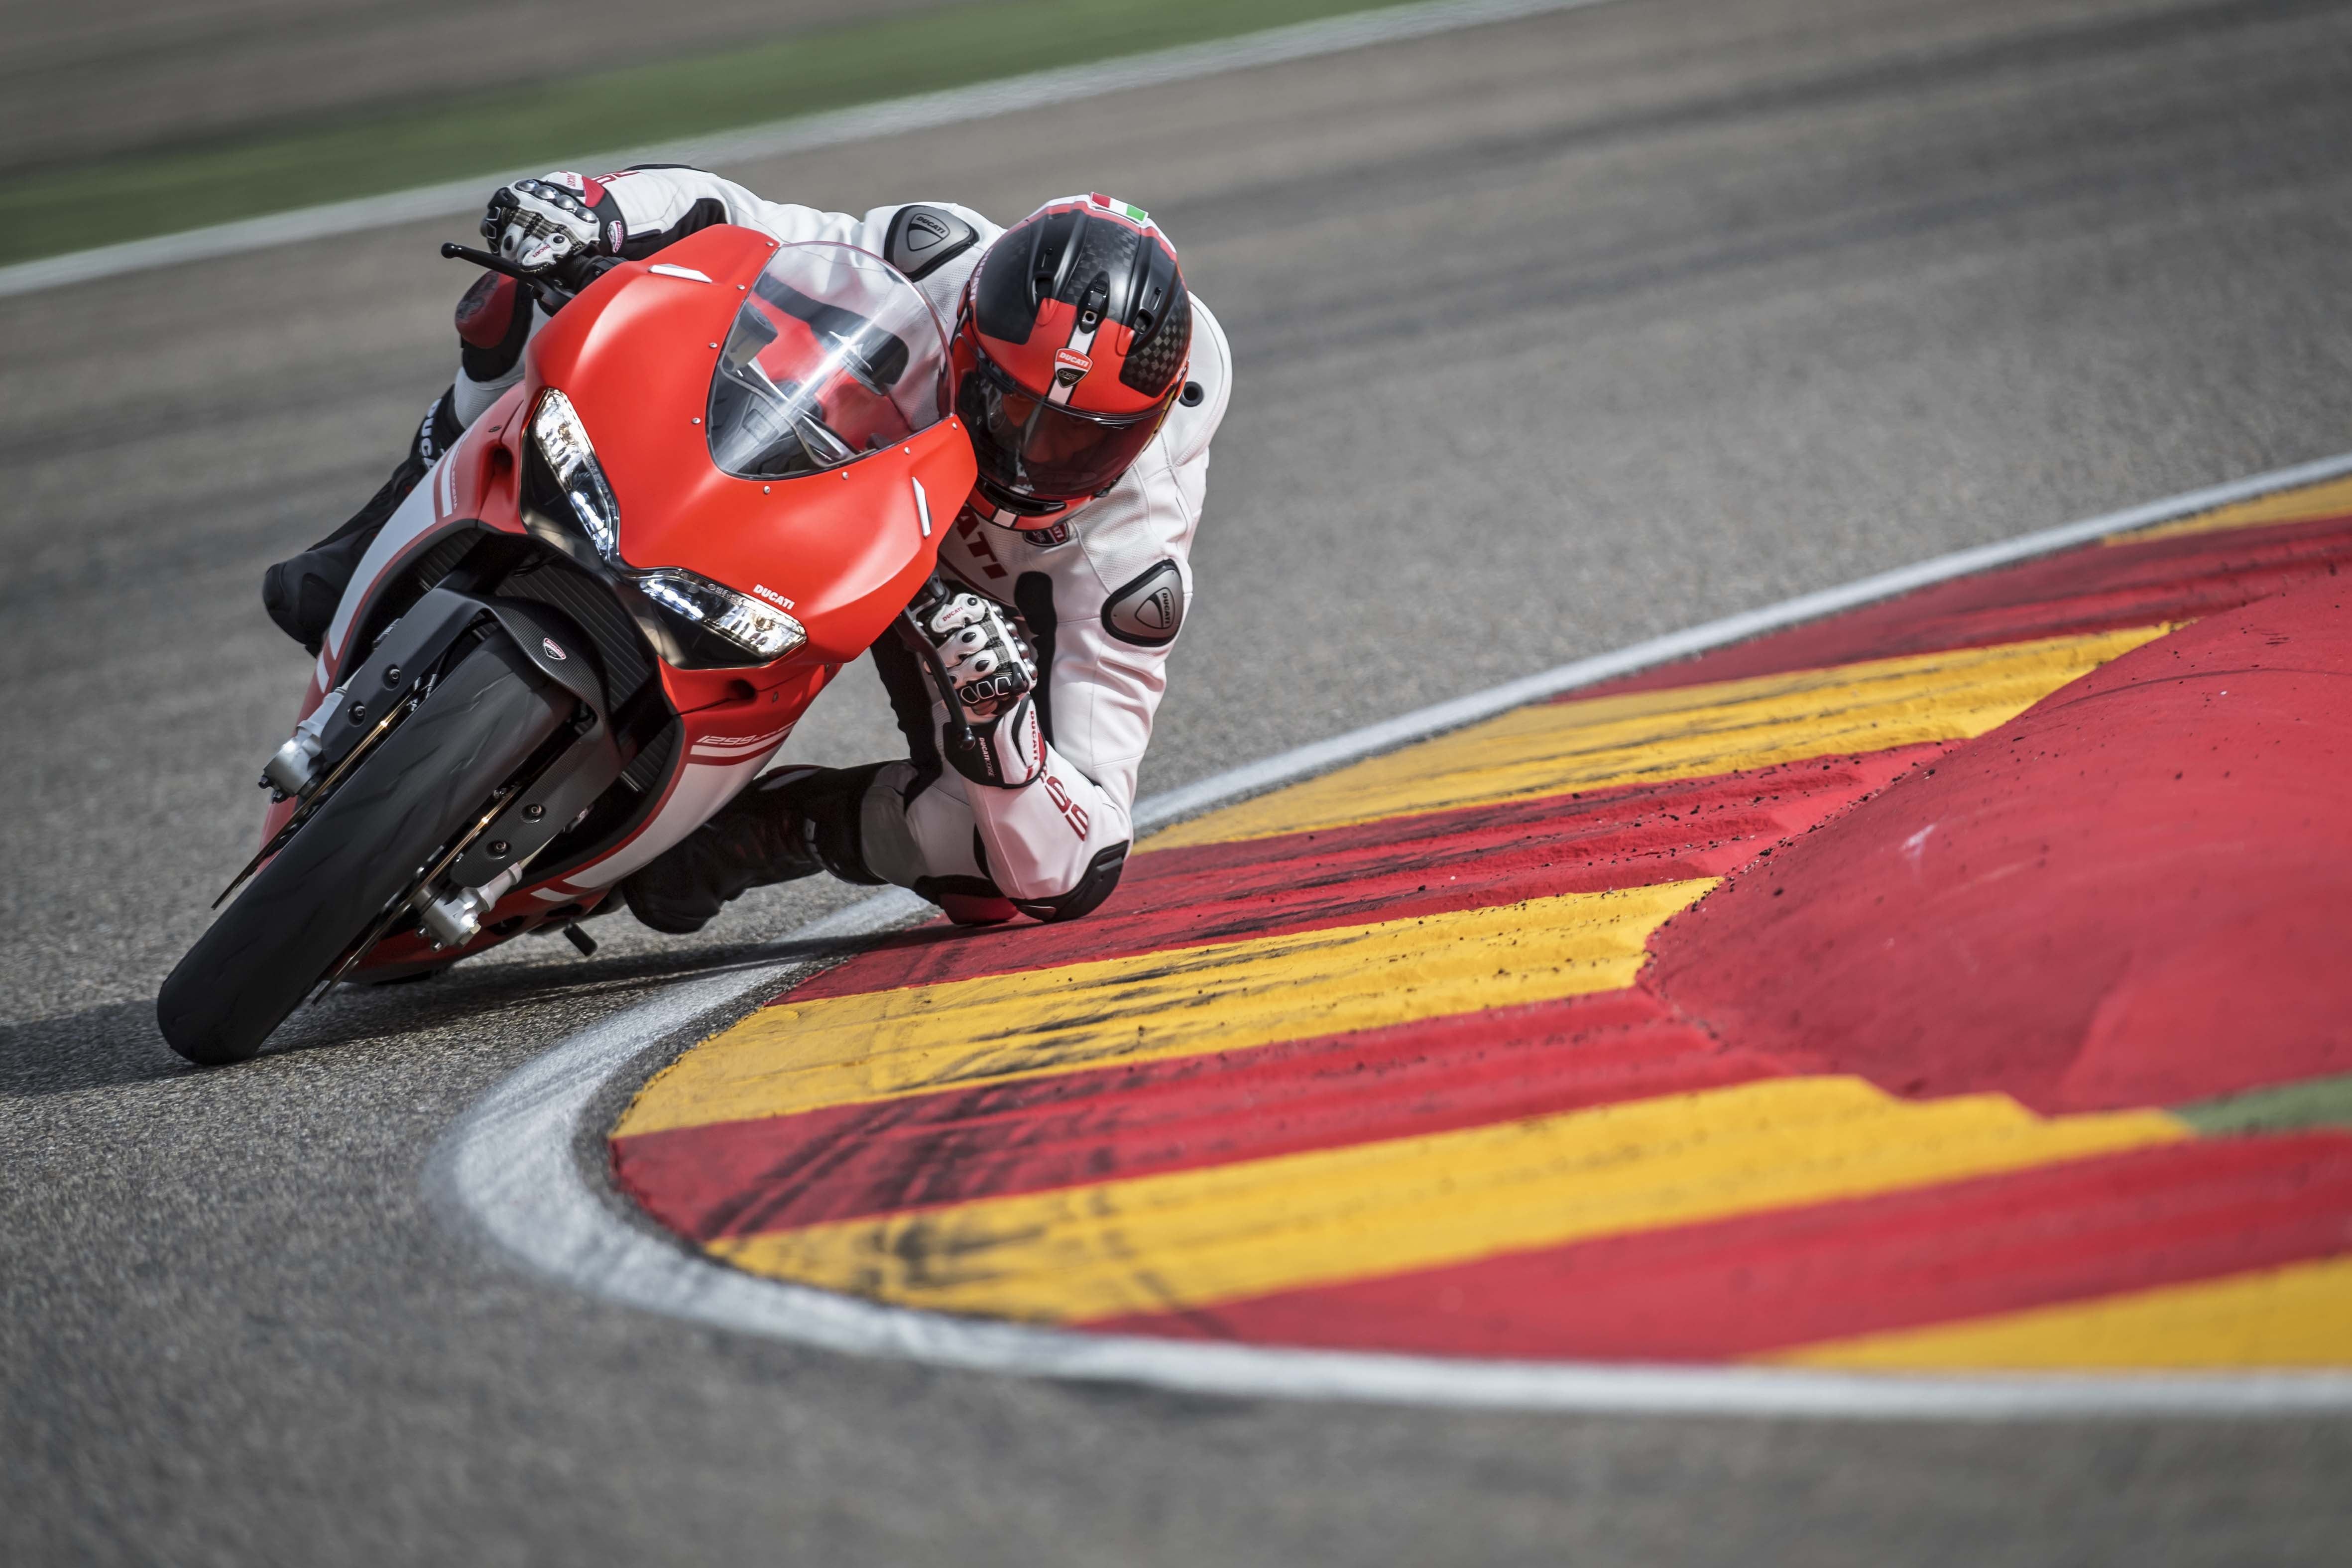 Red and white sport bike on racing track HD wallpaper. Wallpaper